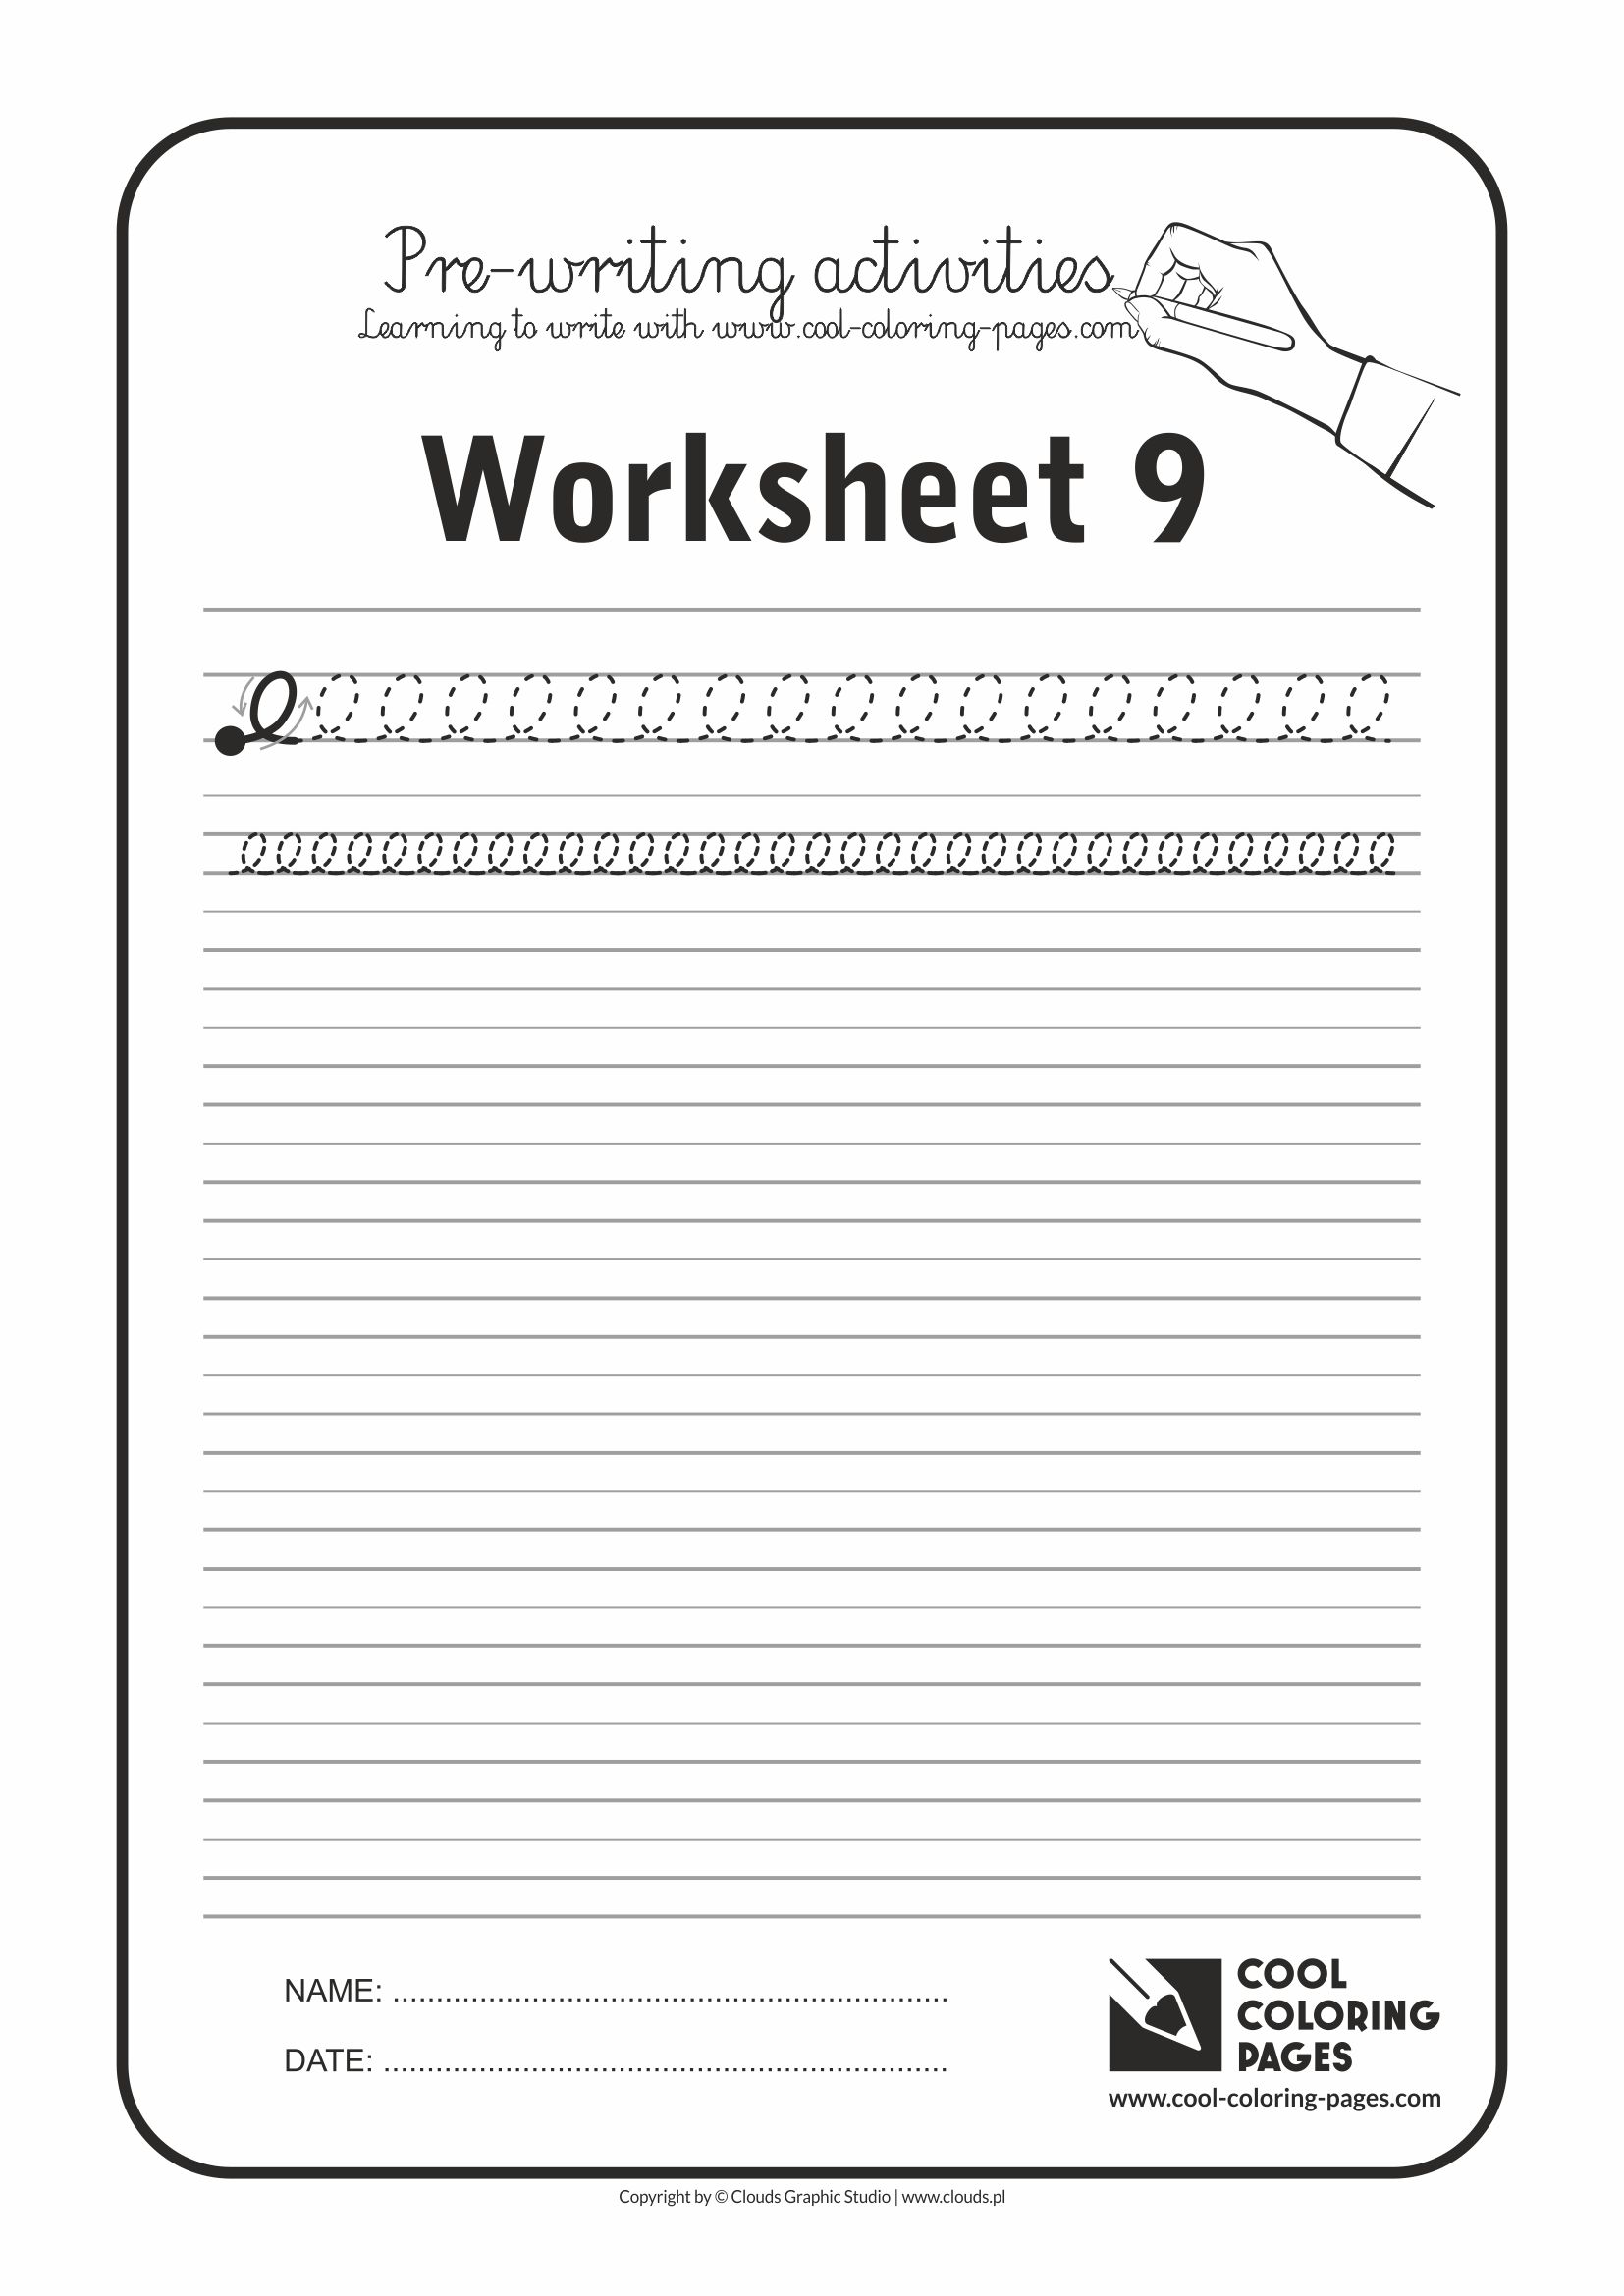 Cool Coloring Pages / Pre-writing activities / Worksheet no.9